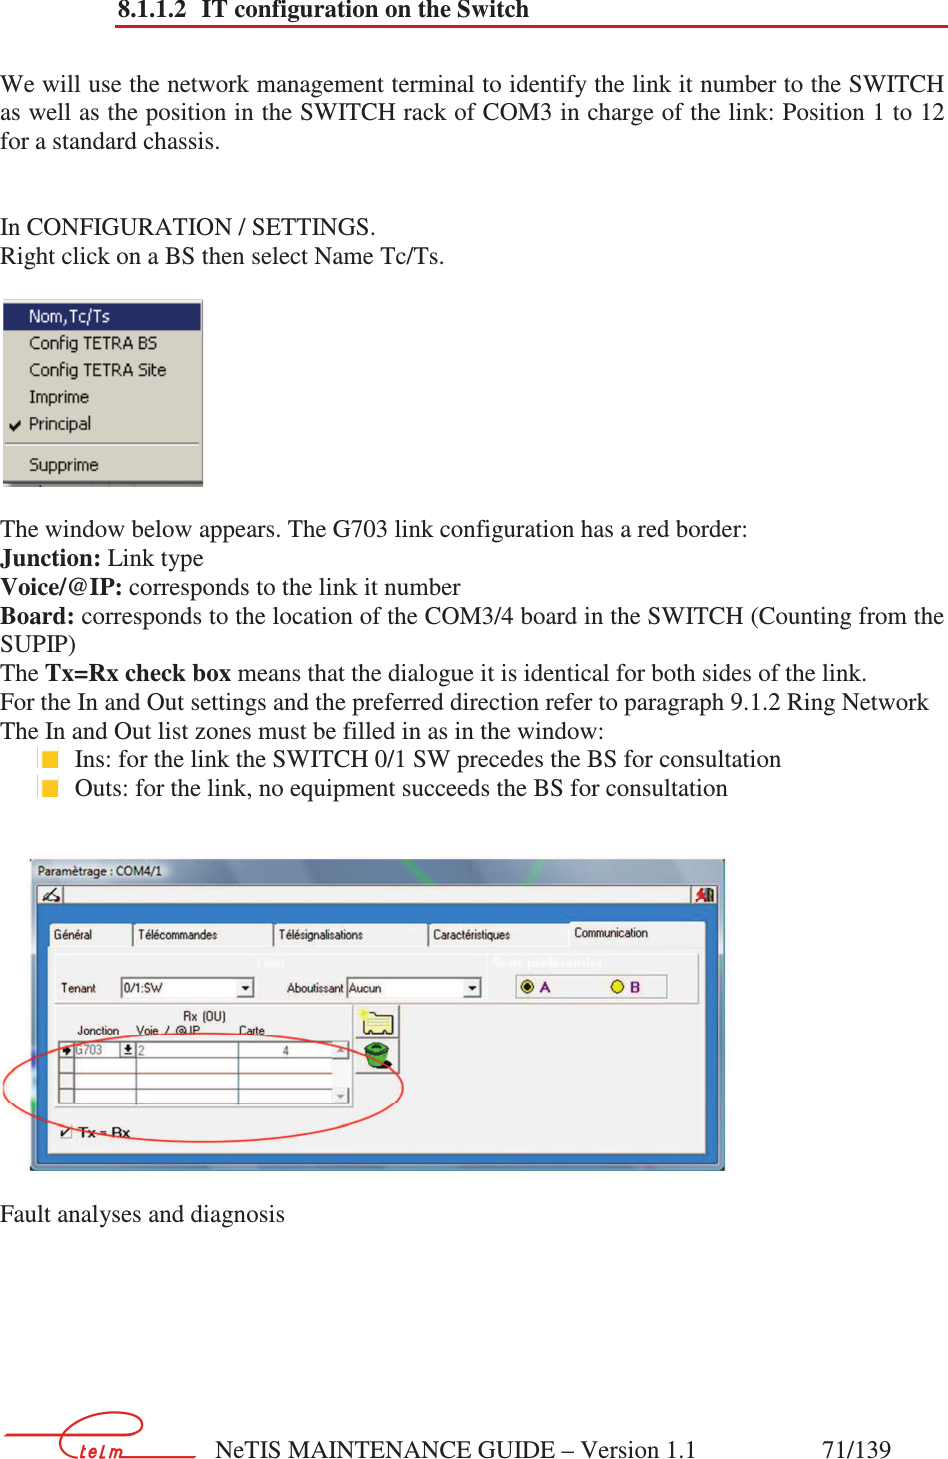        NeTIS MAINTENANCE GUIDE – Version 1.1                    71/139   8.1.1.2 IT configuration on the Switch  We will use the network management terminal to identify the link it number to the SWITCH as well as the position in the SWITCH rack of COM3 in charge of the link: Position 1 to 12 for a standard chassis.    In CONFIGURATION / SETTINGS. Right click on a BS then select Name Tc/Ts.    The window below appears. The G703 link configuration has a red border:  Junction: Link type Voice/@IP: corresponds to the link it number Board: corresponds to the location of the COM3/4 board in the SWITCH (Counting from the SUPIP) The Tx=Rx check box means that the dialogue it is identical for both sides of the link. For the In and Out settings and the preferred direction refer to paragraph 9.1.2 Ring Network  The In and Out list zones must be filled in as in the window:  Ins: for the link the SWITCH 0/1 SW precedes the BS for consultation  Outs: for the link, no equipment succeeds the BS for consultation    Fault analyses and diagnosis 